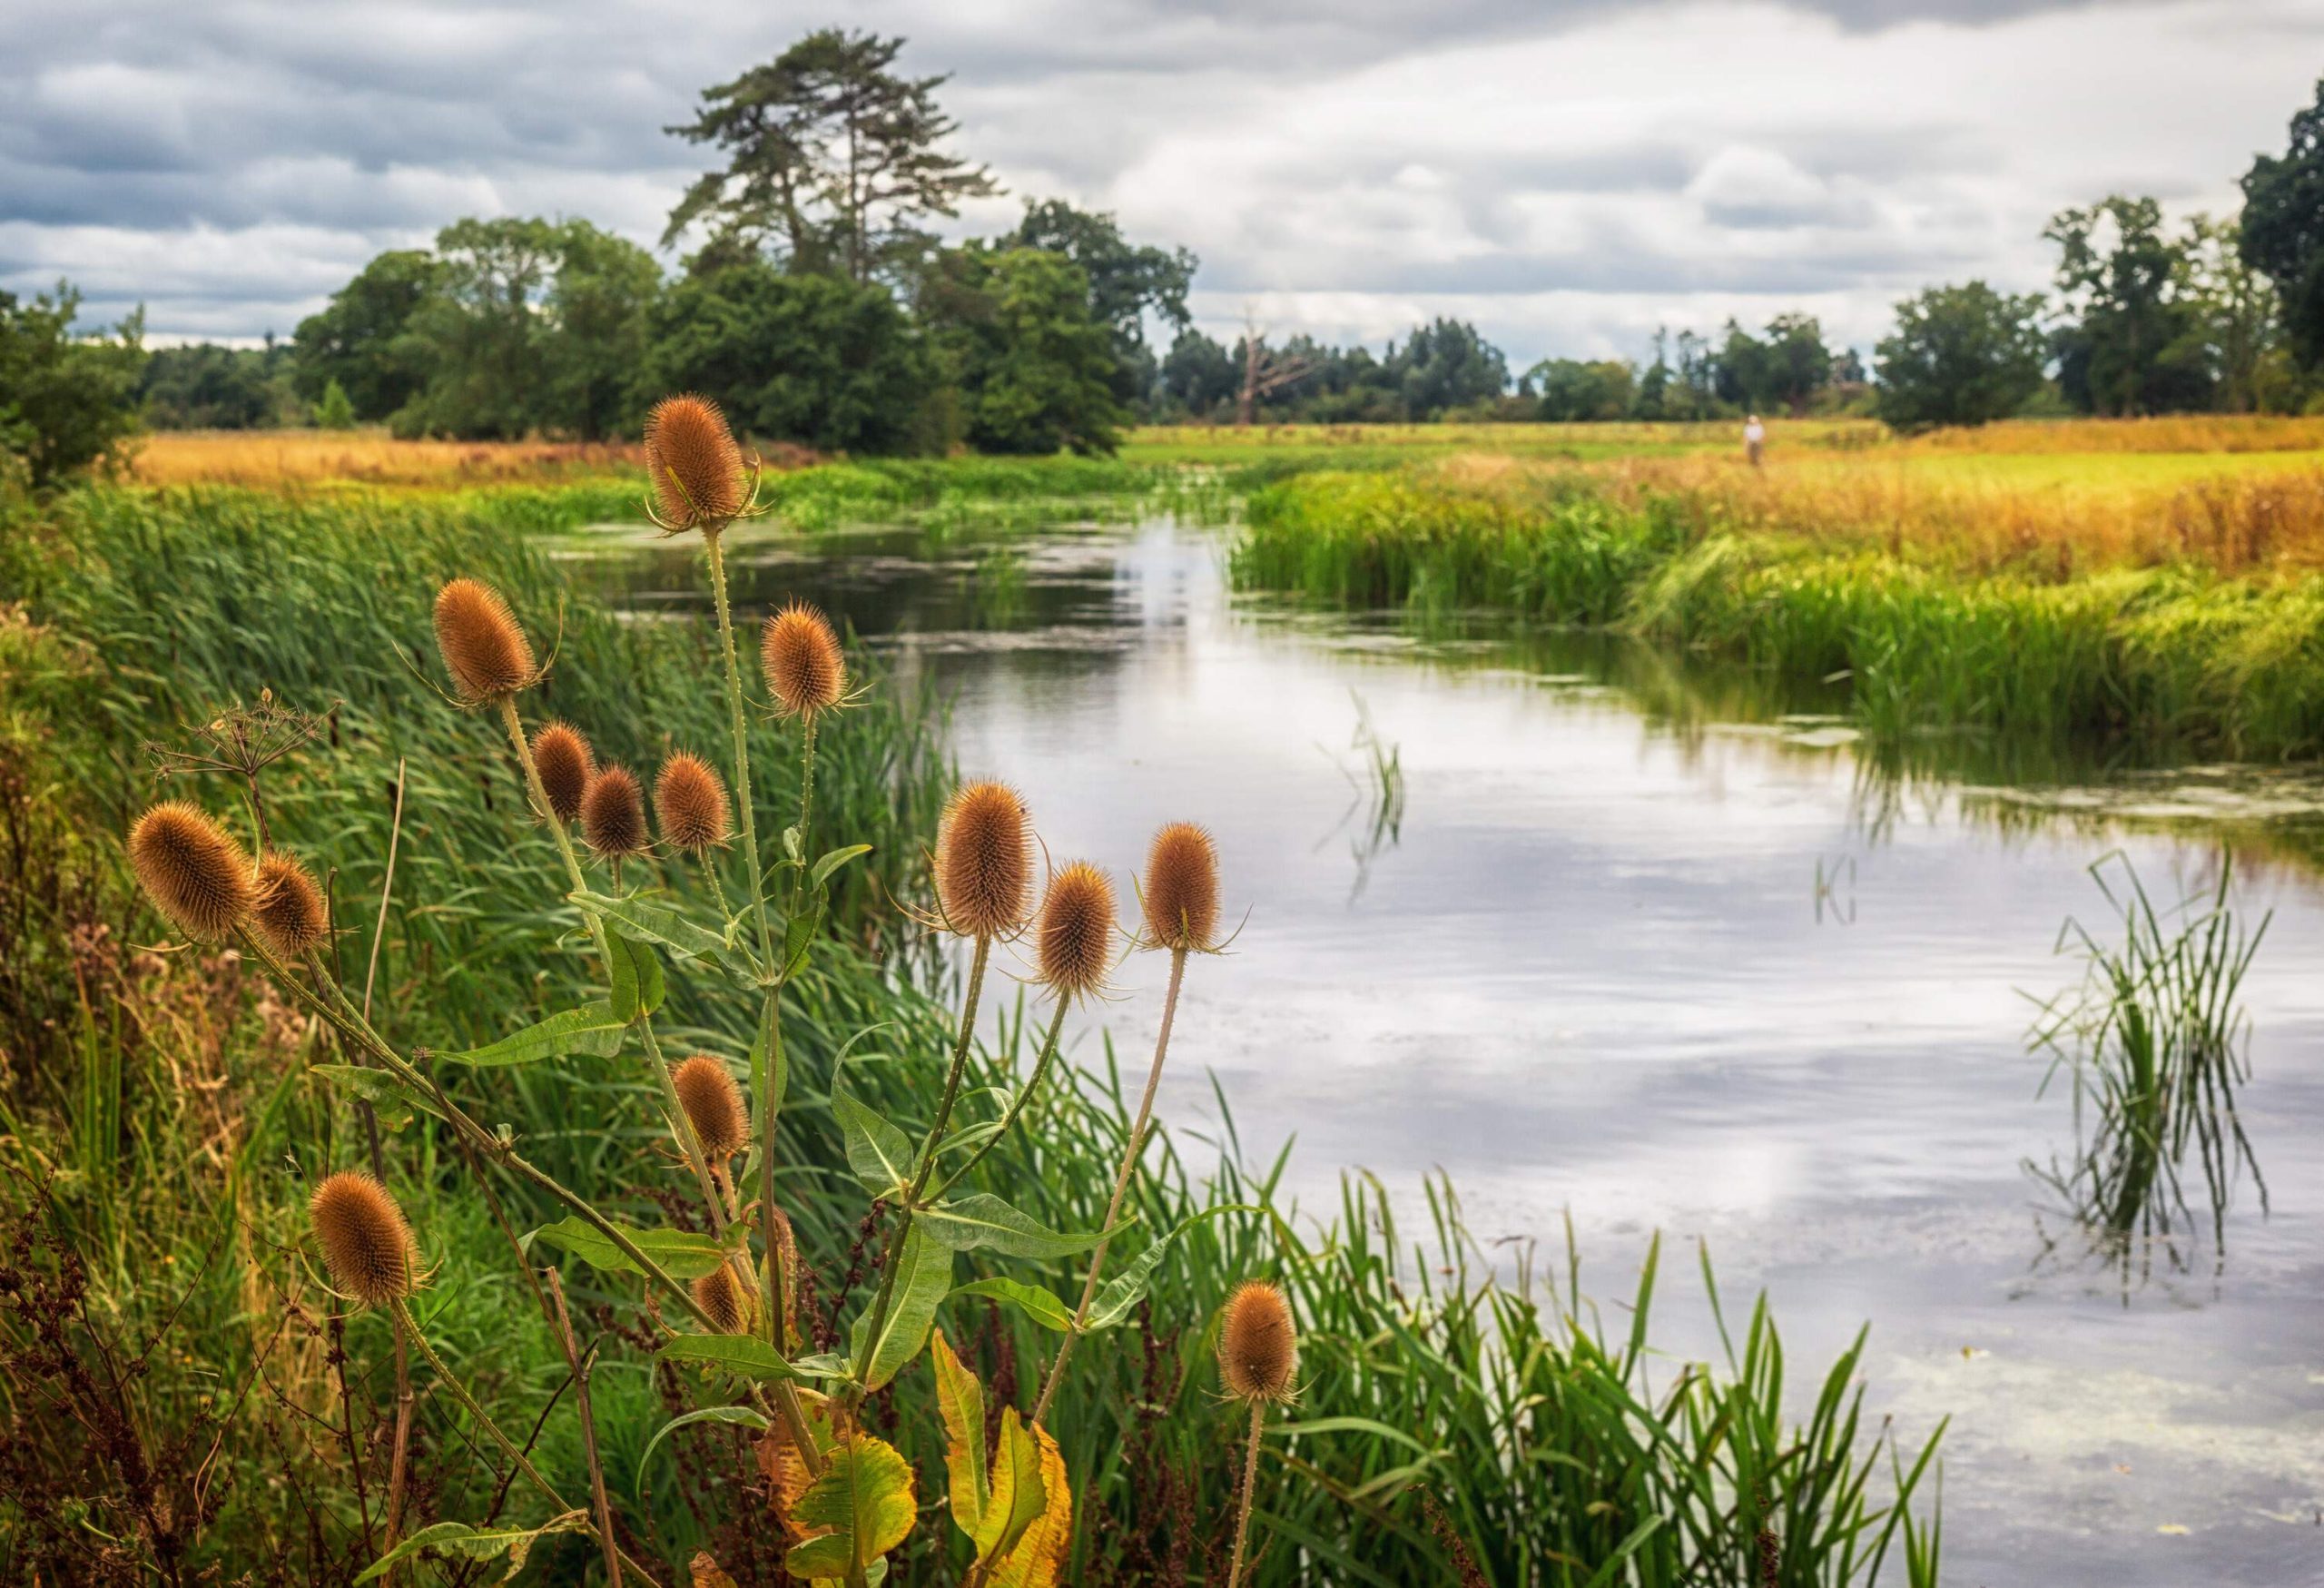 A field of teasel plants surrounds a small lake.